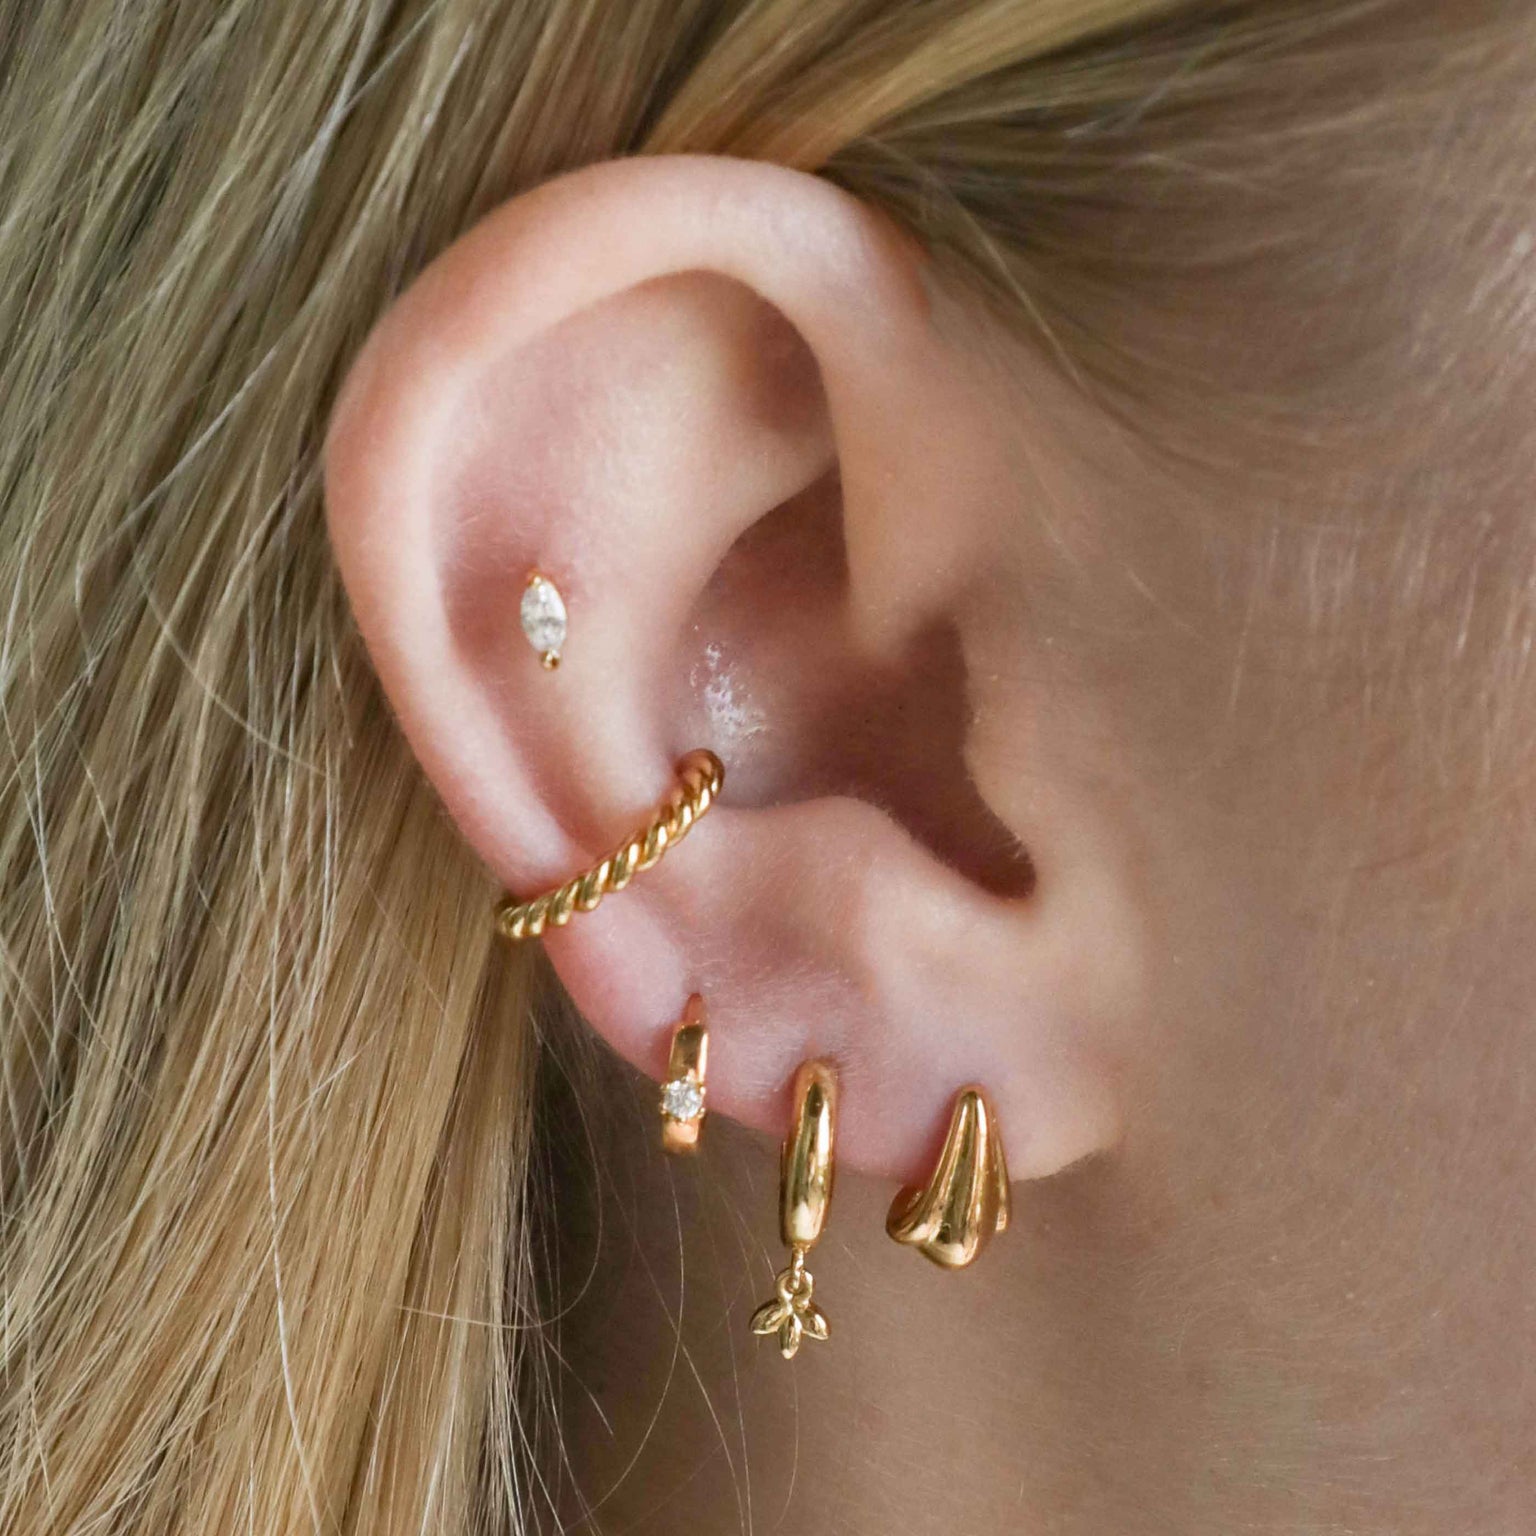 Navette Stud Earrings in Gold worn in outer conch